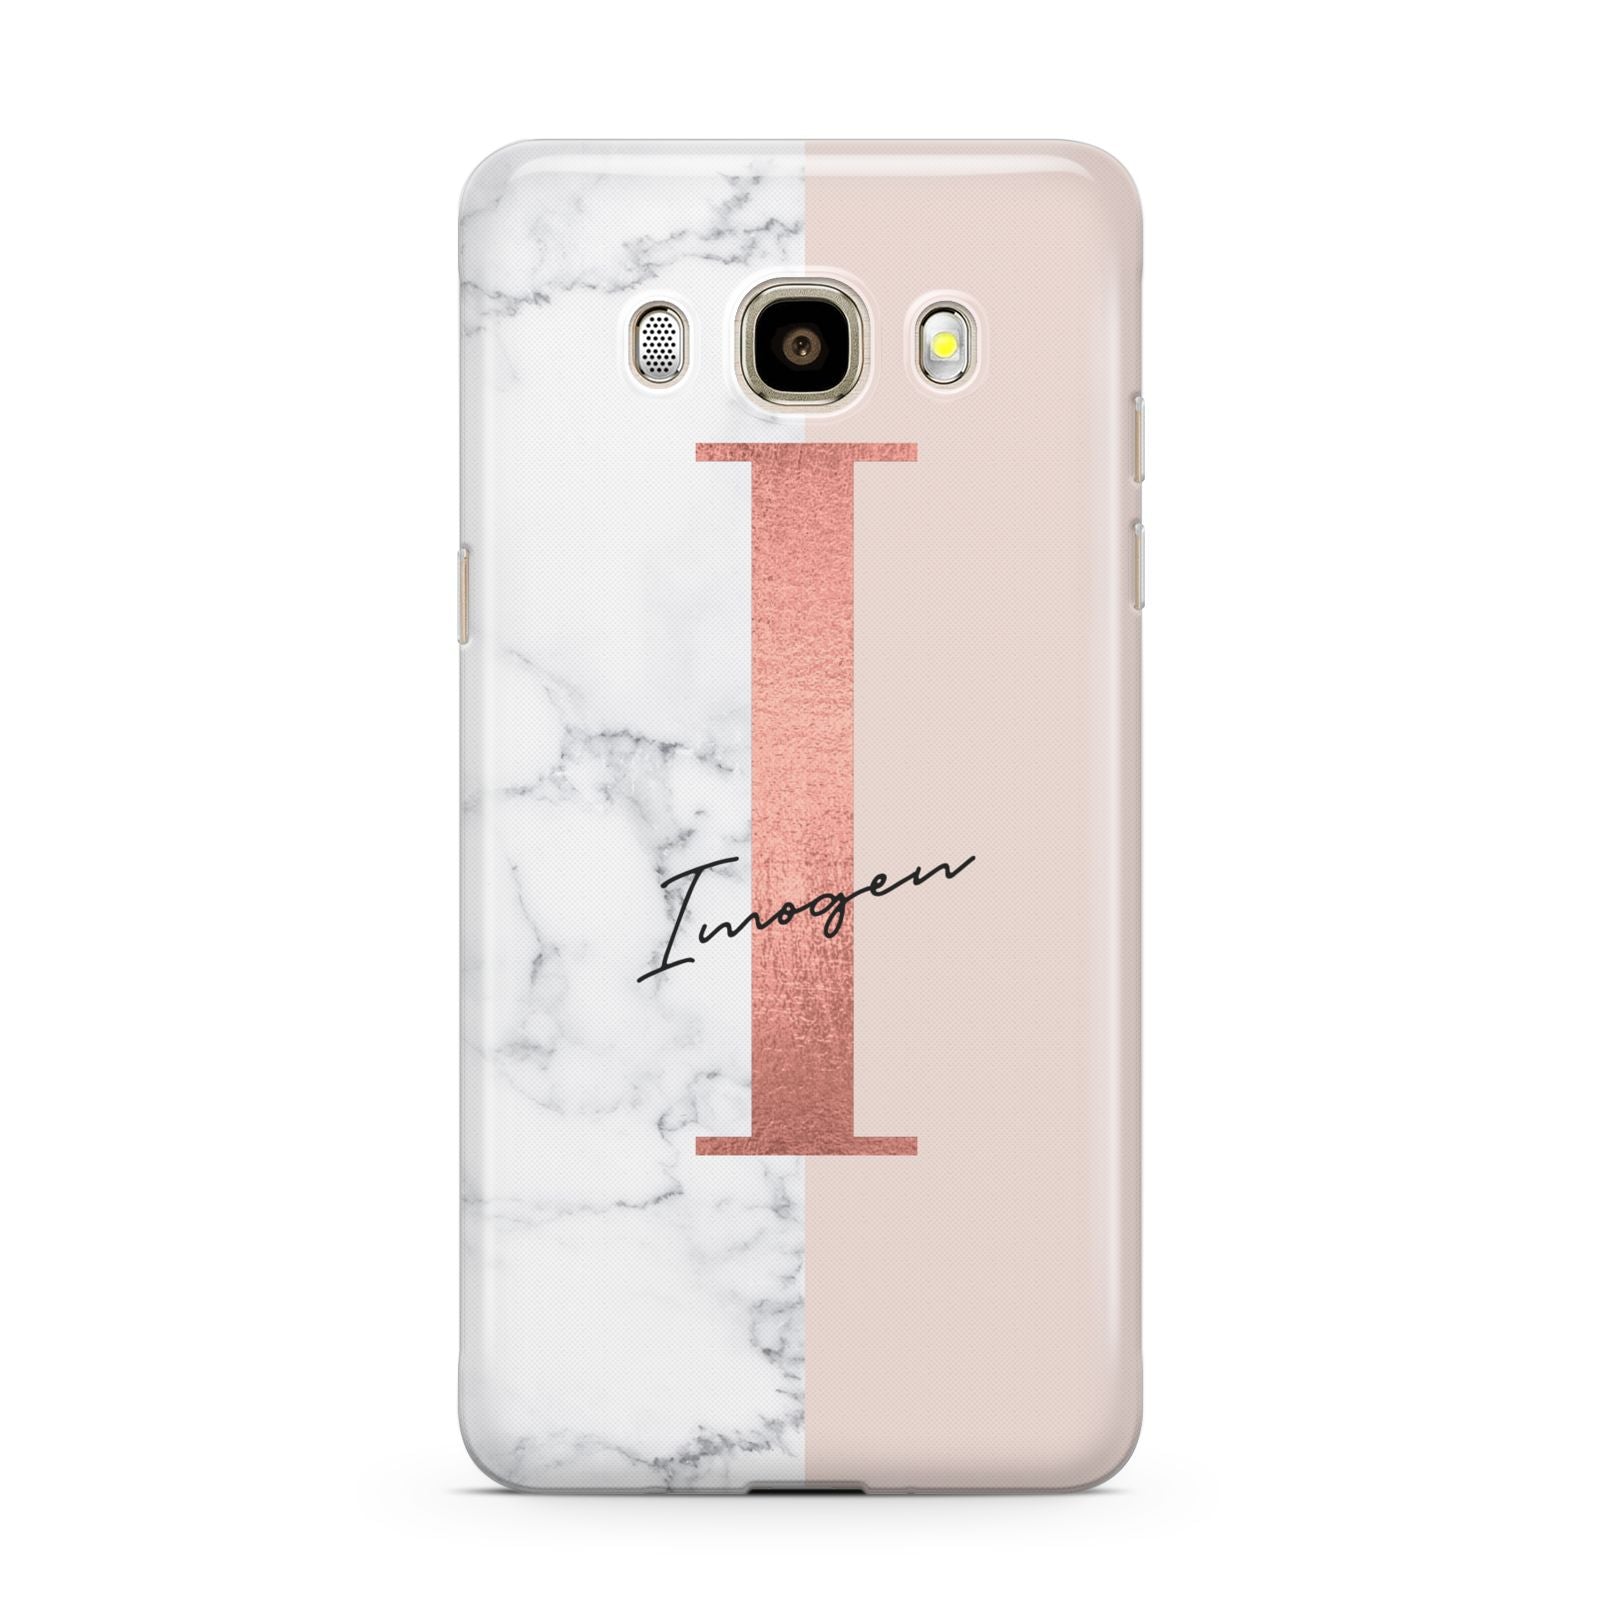 Monogrammed Rose Gold Marble Samsung Galaxy J7 2016 Case on gold phone